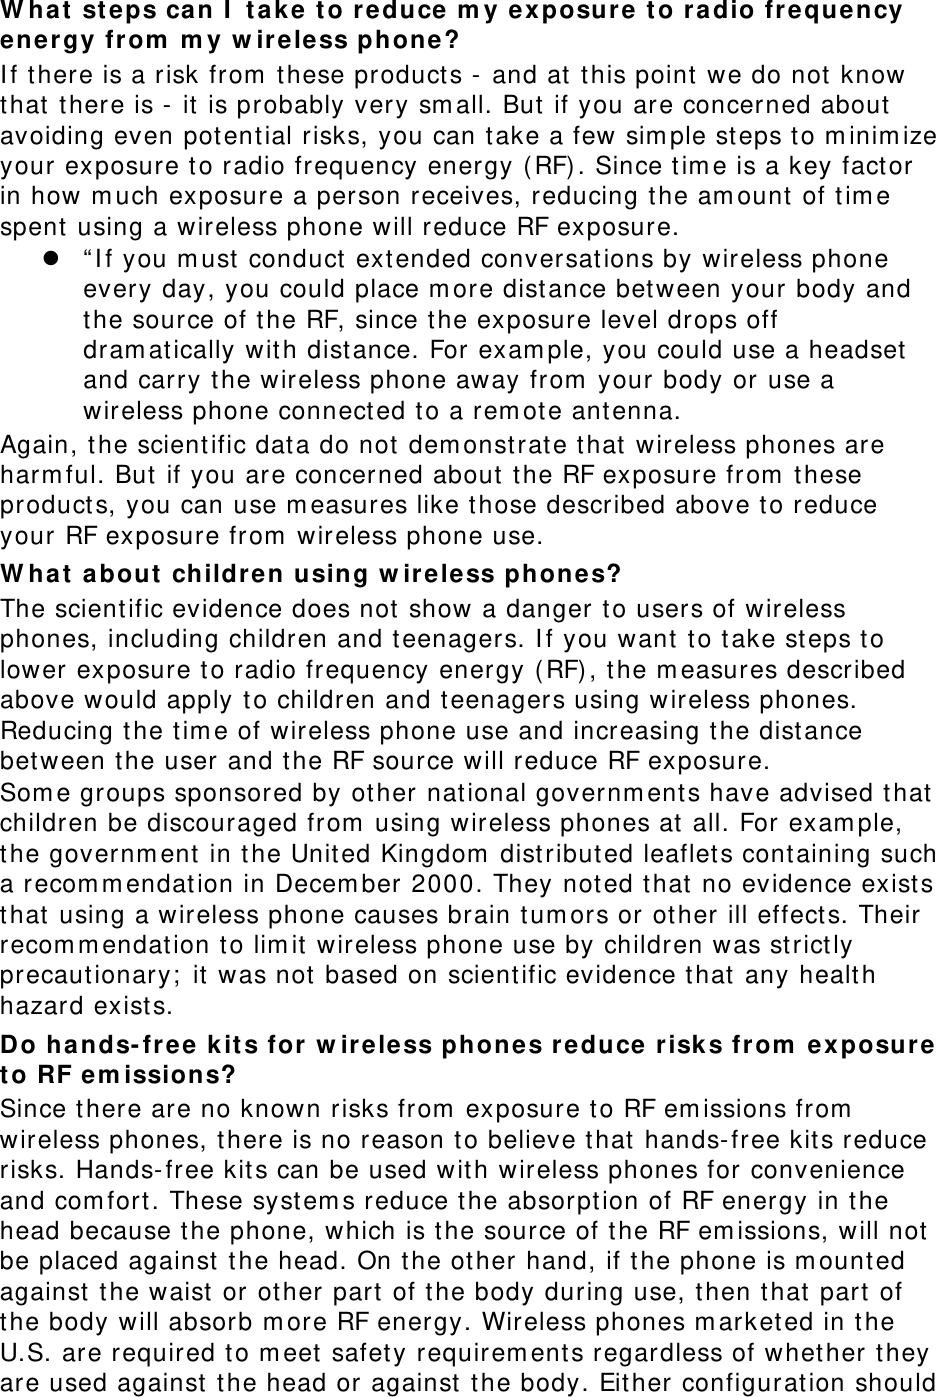 W hat  st eps can I  t ake to reduce m y exposure t o ra dio frequency energy from  m y w ireless phone? I f there is a risk  from  these product s - and at t his point we do not  know that  t here is - it  is probably very sm all. But  if you are concerned about  avoiding even pot ential risks, you can t ake a few  sim ple st eps t o m inim ize your exposure t o radio frequency energy (RF) . Since t im e is a key fact or in how m uch exposure a person receives, reducing the am ount of tim e spent using a wireless phone will reduce RF exposure.  “ I f you m ust conduct  ext ended conversat ions by wireless phone every day, you could place m ore dist ance bet ween your body and the source of the RF, since the exposure level drops off dram atically wit h dist ance. For exam ple, you could use a headset  and carry the wireless phone away from  your body or use a wireless phone connect ed to a rem ote antenna. Again, t he scient ific dat a do not dem onst rat e that  wireless phones are harm ful. But if you are concerned about  the RF exposure from  these product s, you can use m easures like t hose described above to reduce your RF exposure from  wireless phone use. W h at  about  children using w ireless phones? The scient ific evidence does not show a danger to users of wireless phones, including children and t eenagers. I f you want  to t ake st eps to lower exposure to radio frequency energy (RF) , the m easures described above would apply to children and teenagers using w ireless phones. Reducing t he tim e of wireless phone use and increasing the dist ance bet ween the user and t he RF source will reduce RF exposure. Som e groups sponsored by ot her nat ional governm ent s have advised that  children be discouraged from  using wireless phones at  all. For  exam ple, the governm ent  in the Unit ed Kingdom  distribut ed leaflet s cont aining such a recom m endat ion in Decem ber 2000. They not ed that  no evidence exists that  using a wireless phone causes brain t um ors or ot her ill effects. Their recom m endat ion to lim it wireless phone use by children was st rict ly precautionary;  it  was not based on scient ific evidence that  any healt h hazard exists.   Do hands-fr ee k its for w ire less phones re duce  risk s from  e x posur e t o RF em issions? Since t here are no known risks from  exposure to RF em issions from  wireless phones, there is no reason to believe t hat  hands-free kits reduce risks. Hands-free kit s can be used wit h wireless phones for convenience and com fort. These syst em s reduce t he absorption of RF energy in t he head because the phone, which is t he source of t he RF em issions, will not be placed against the head. On the ot her hand, if the phone is m ount ed against the waist  or  ot her part of the body during use, then t hat  part of the body will absorb m ore RF energy. Wireless phones m arket ed in t he U.S. are required t o m eet safety requirem ents regardless of whet her t hey are used against  the head or against  t he body. Either configurat ion should 